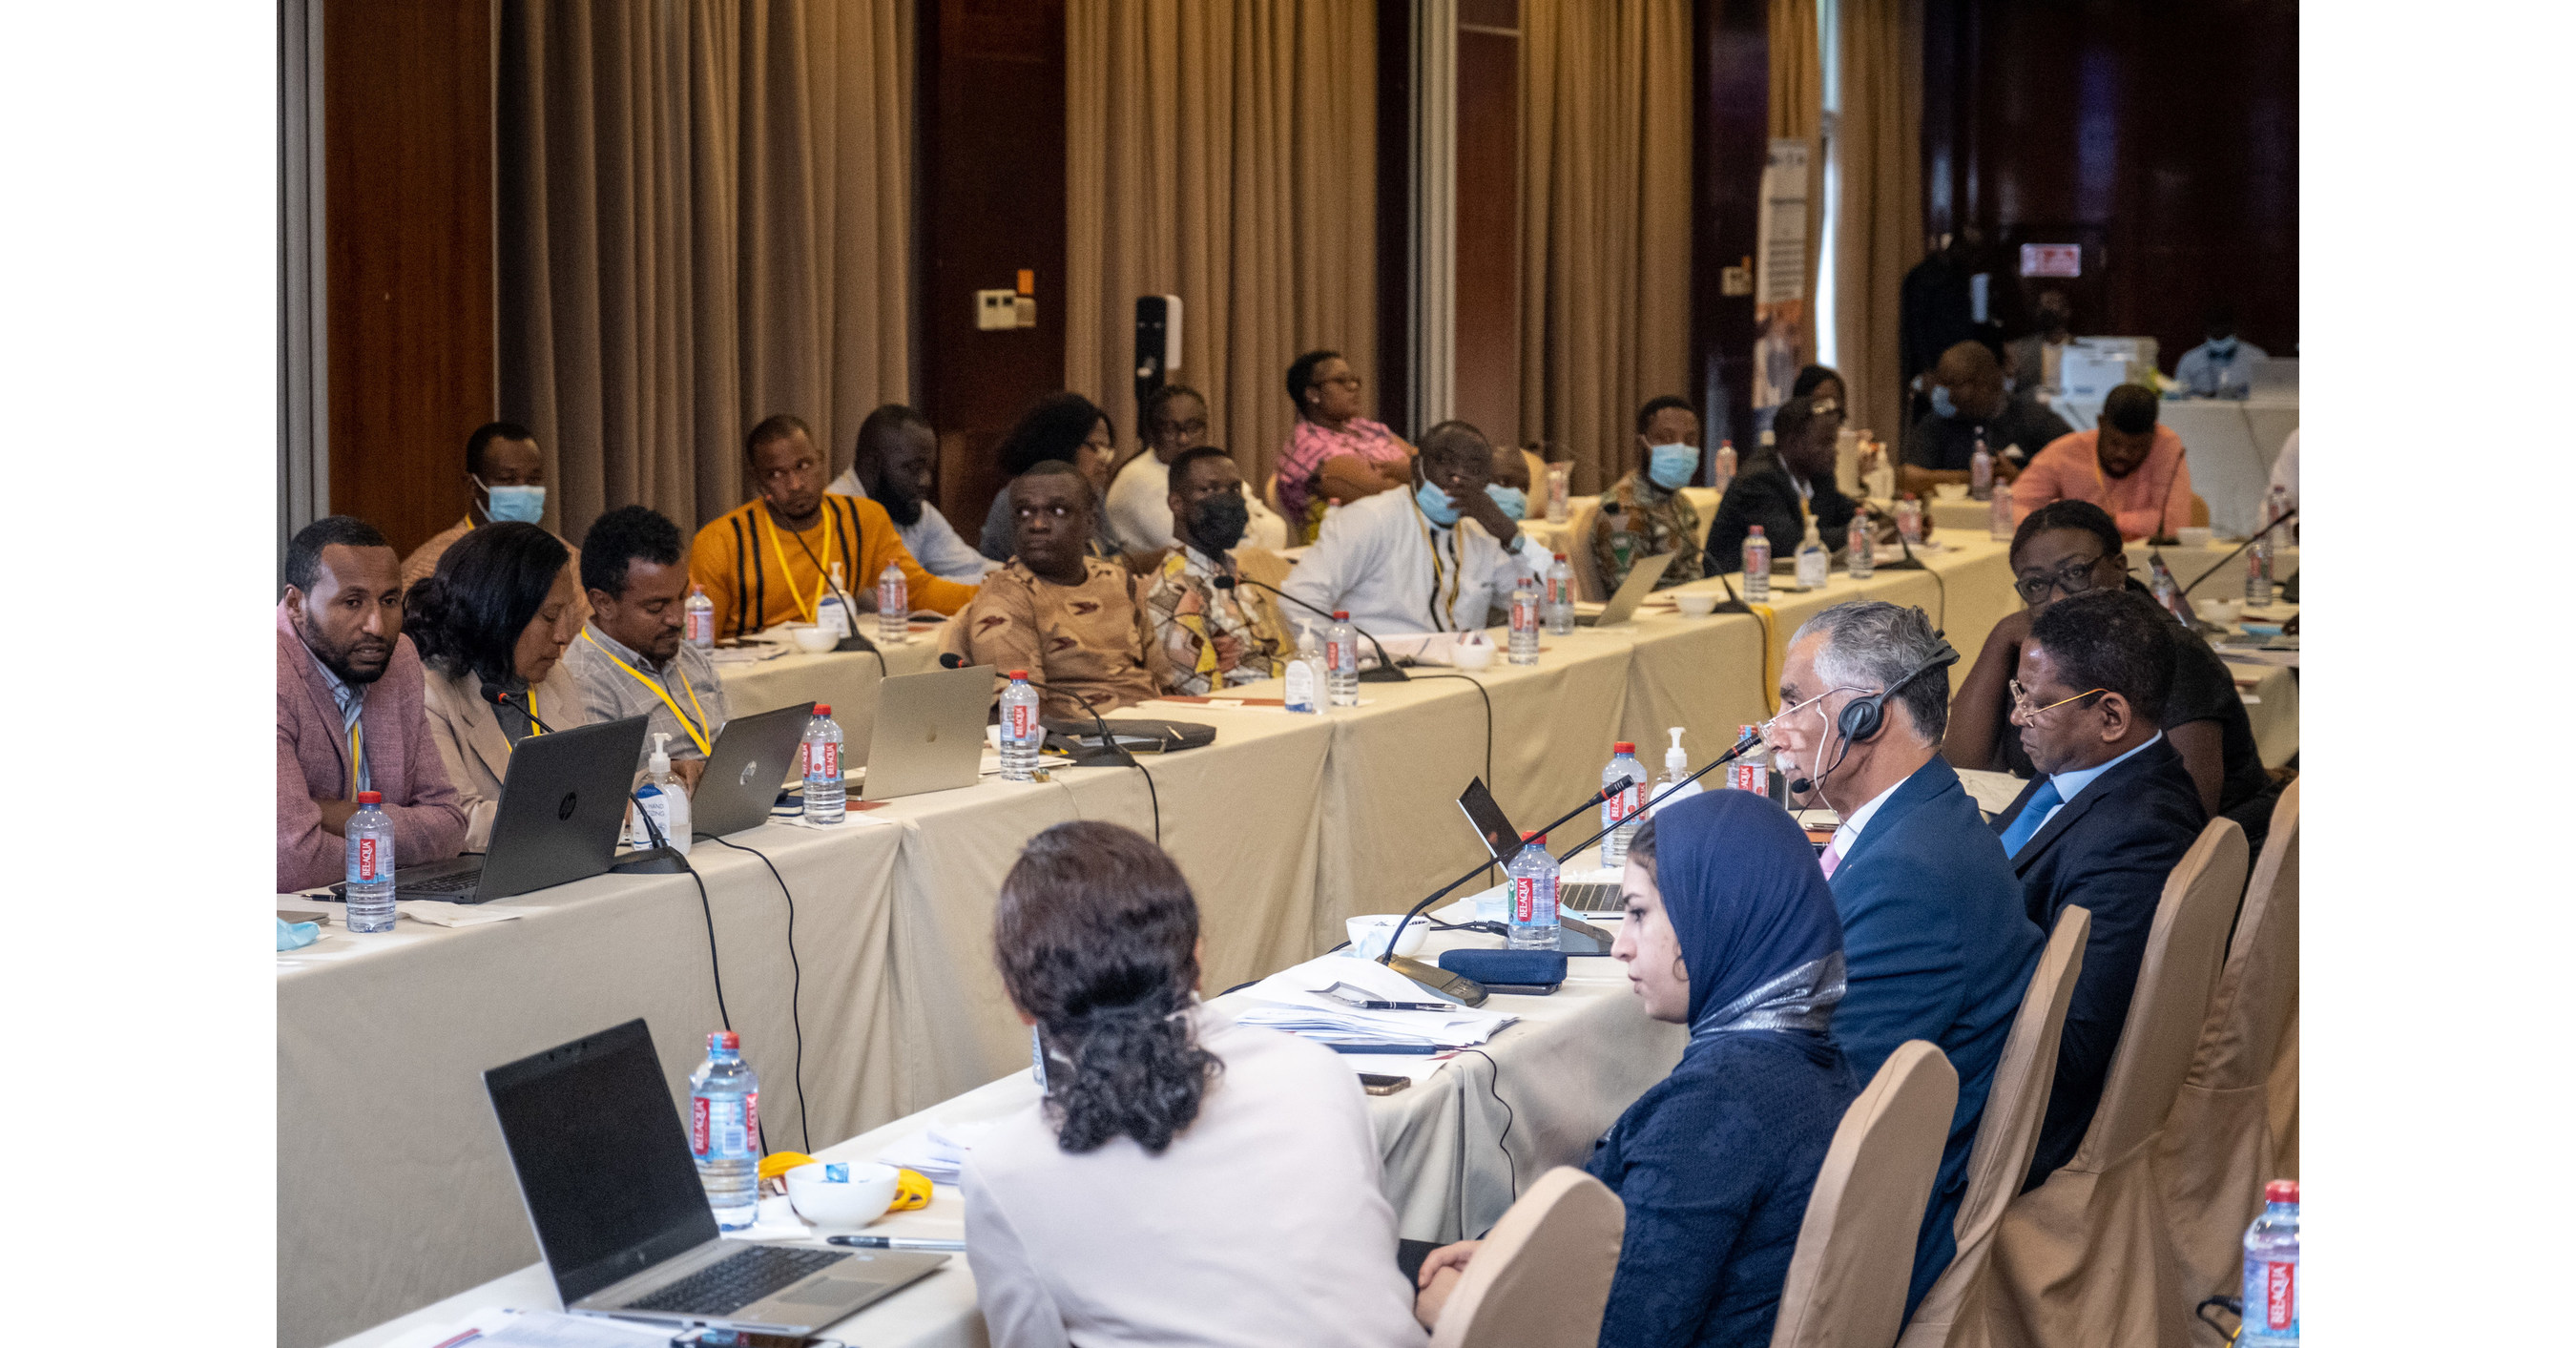 unesco-huawei-technology-enabled-open-schools-for-all-project-progress-reviewed-in-cross-country-seminar